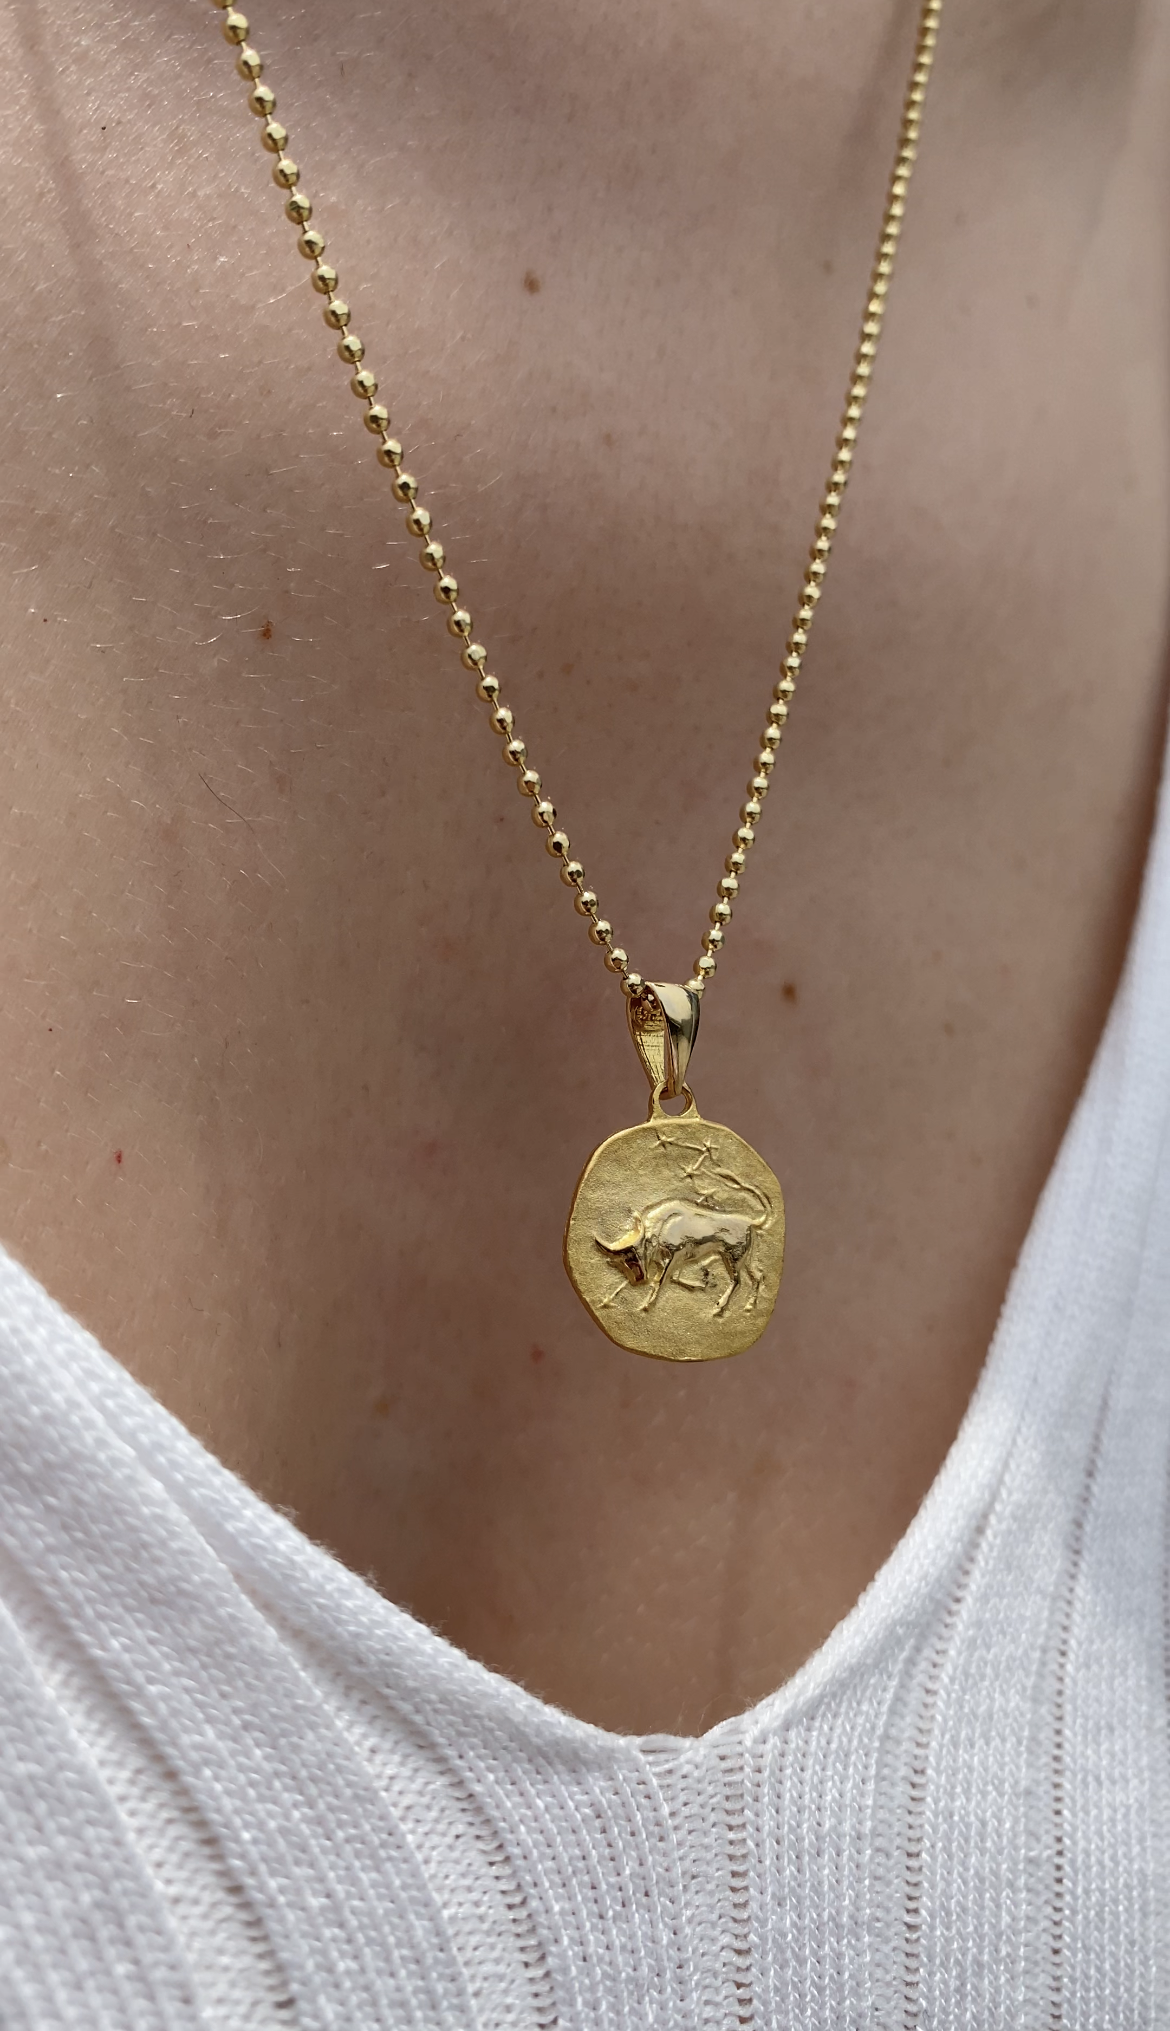 14K Gold Zodiac Taurus Necklace - Elegant Taurus Necklace - Perfect Gift for Astrology Lovers